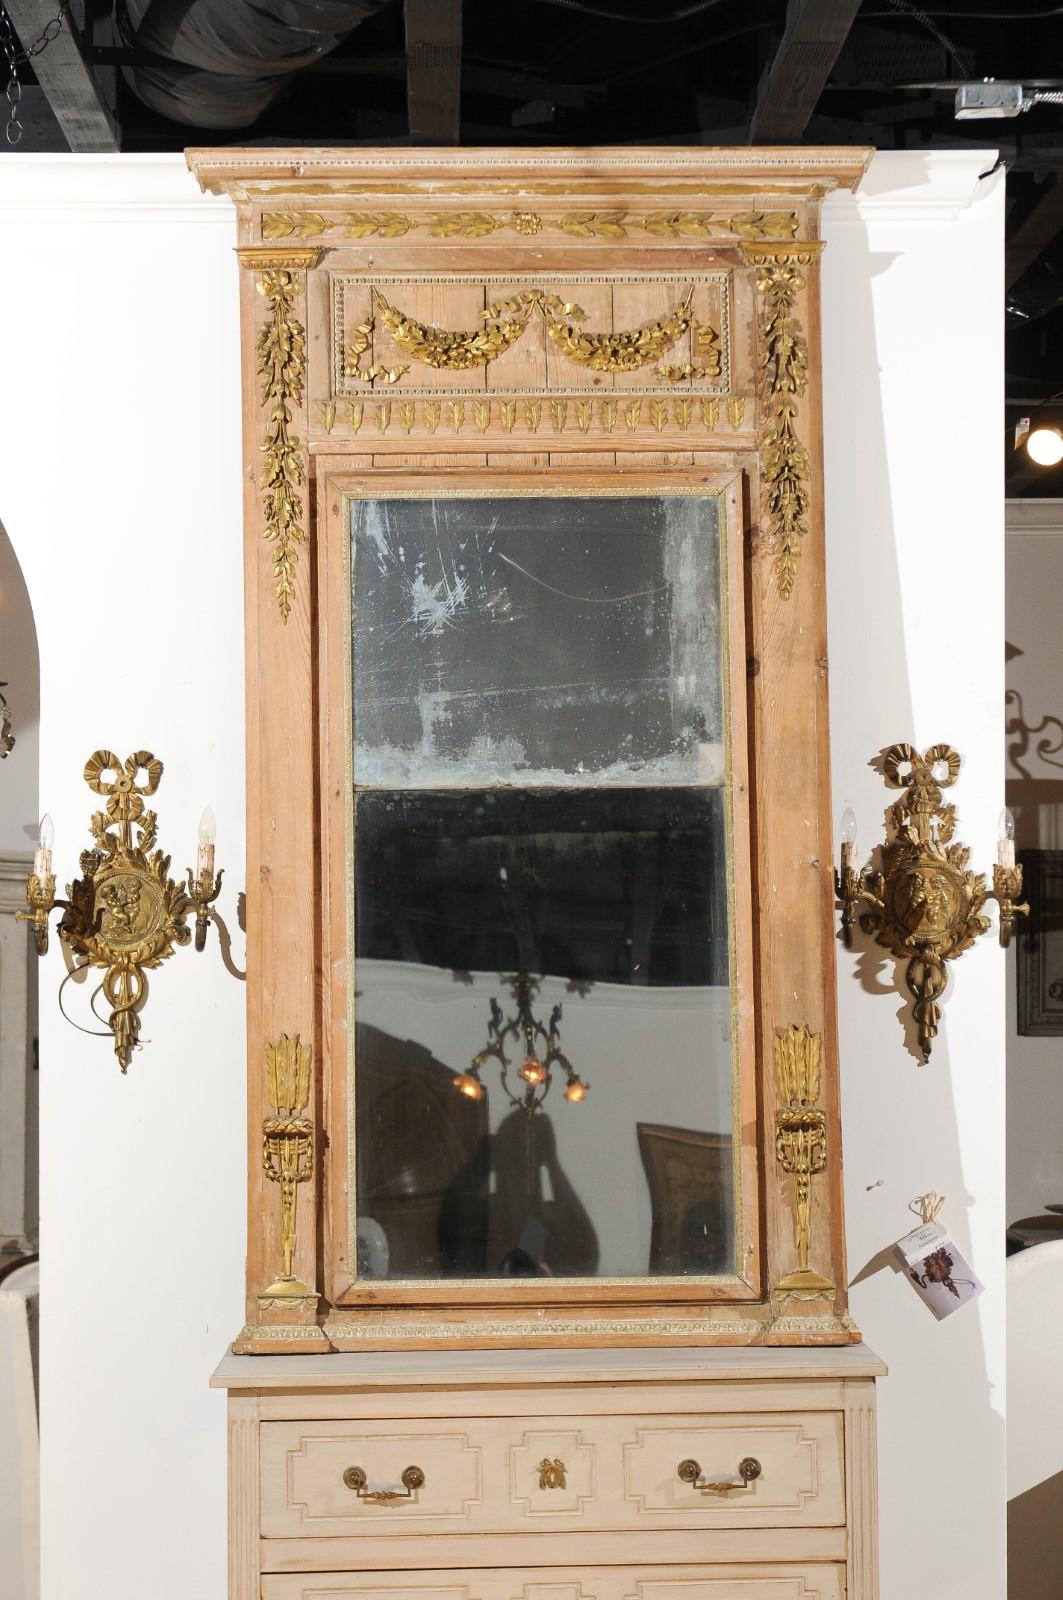 A French Louis XVI period trumeau mirror from the late 18th century, with original glass and hand carved giltwood motifs. Born in France during the reign of King Louis XVI, this trumeau mirror features a wooden frame with natural patina, accented